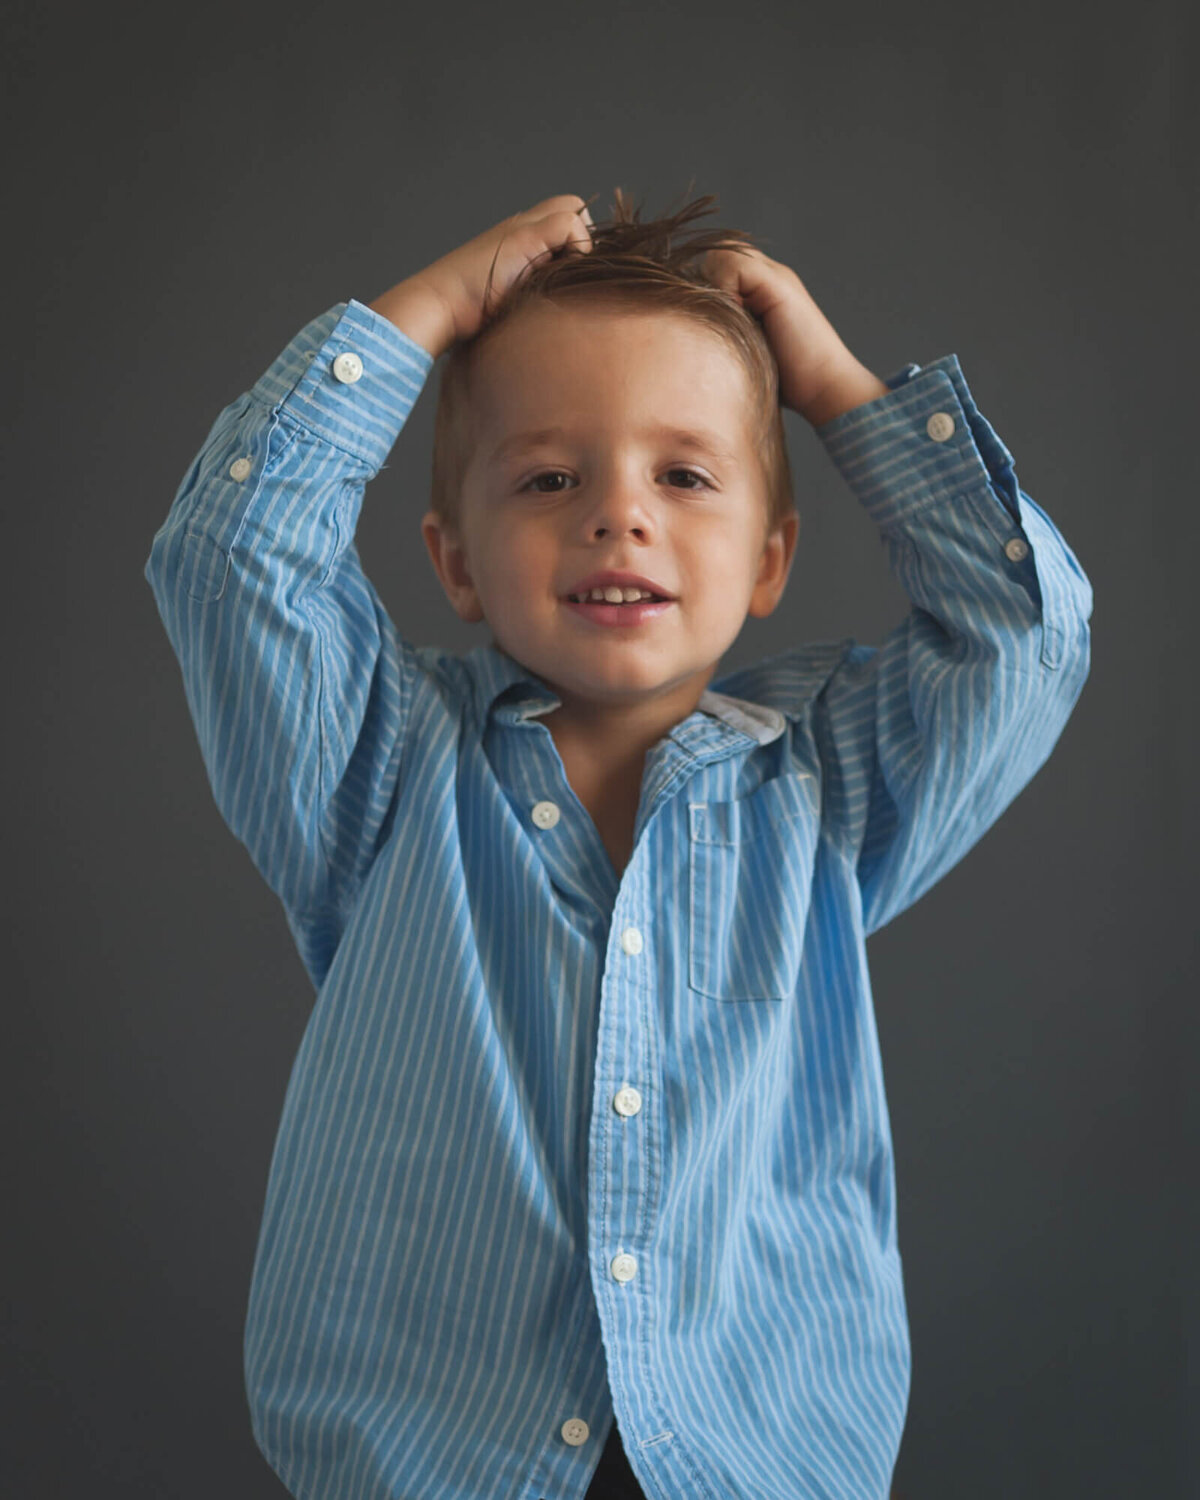 small boy putting hands on head in blue dress shirt with smirk on his face, with grey background